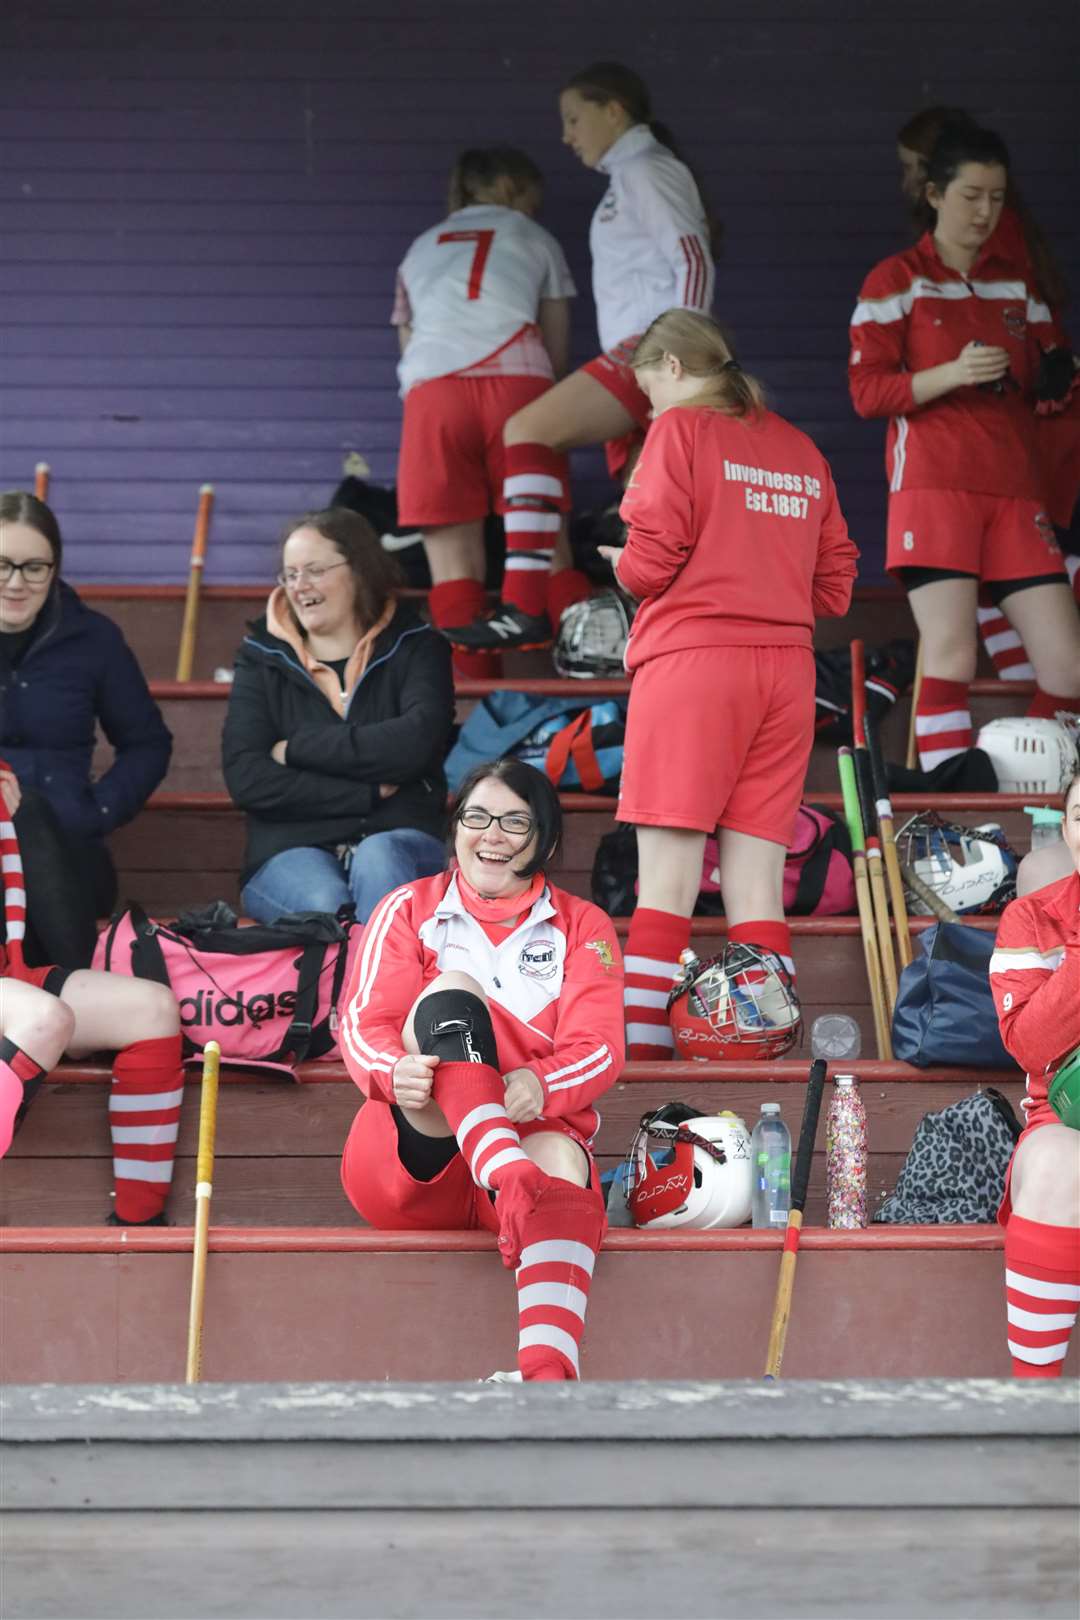 Women's Inverness Shinty team prepare ahead of The Women's Mòd Cup against Alba Women as part of The Royal National Mòd in inverness 9/10/21